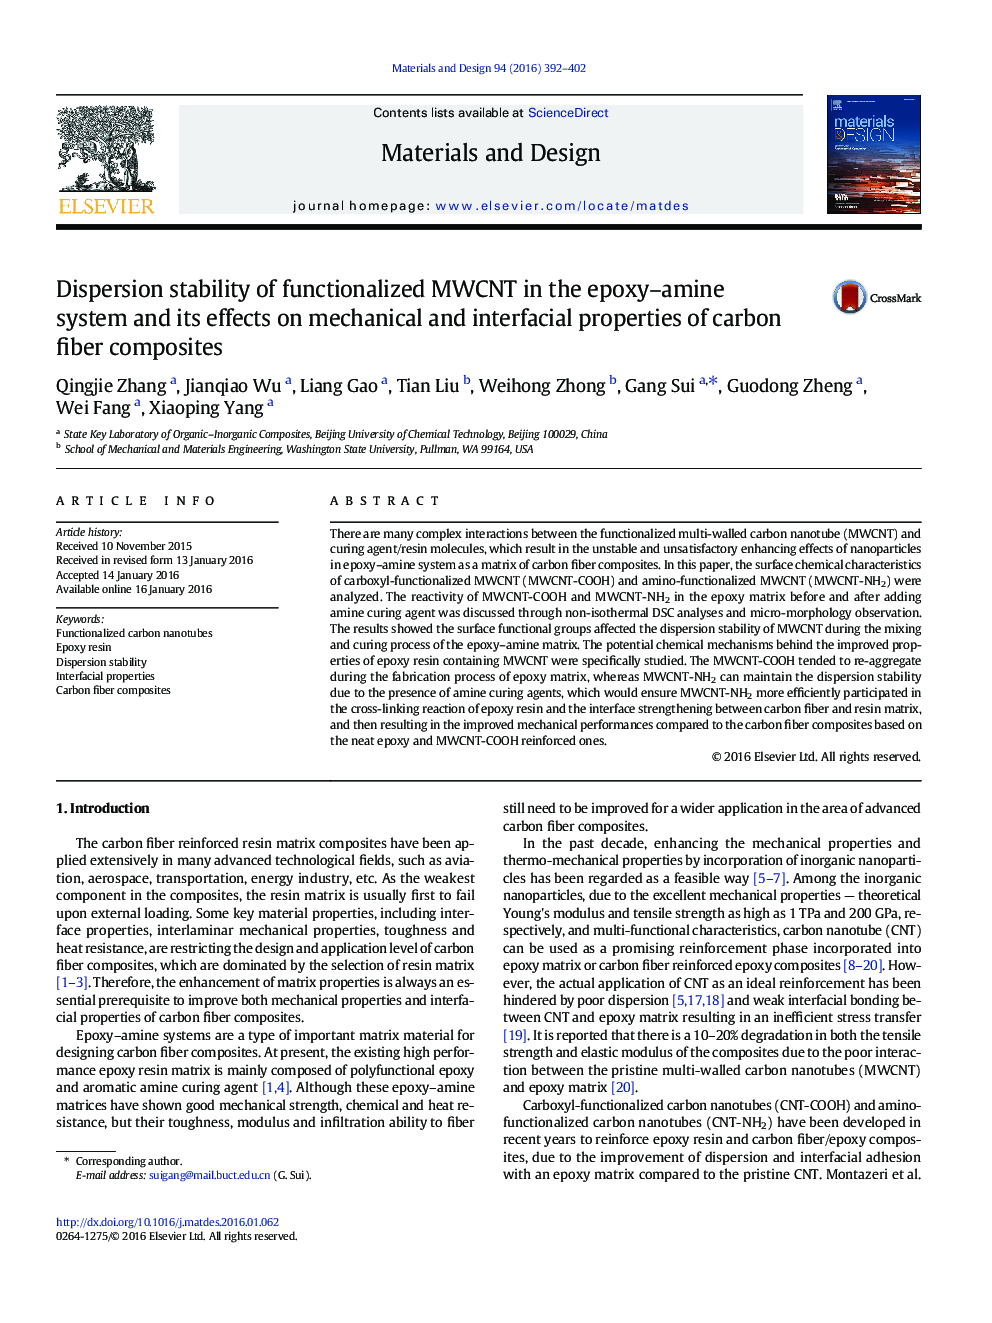 Dispersion stability of functionalized MWCNT in the epoxy-amine system and its effects on mechanical and interfacial properties of carbon fiber composites